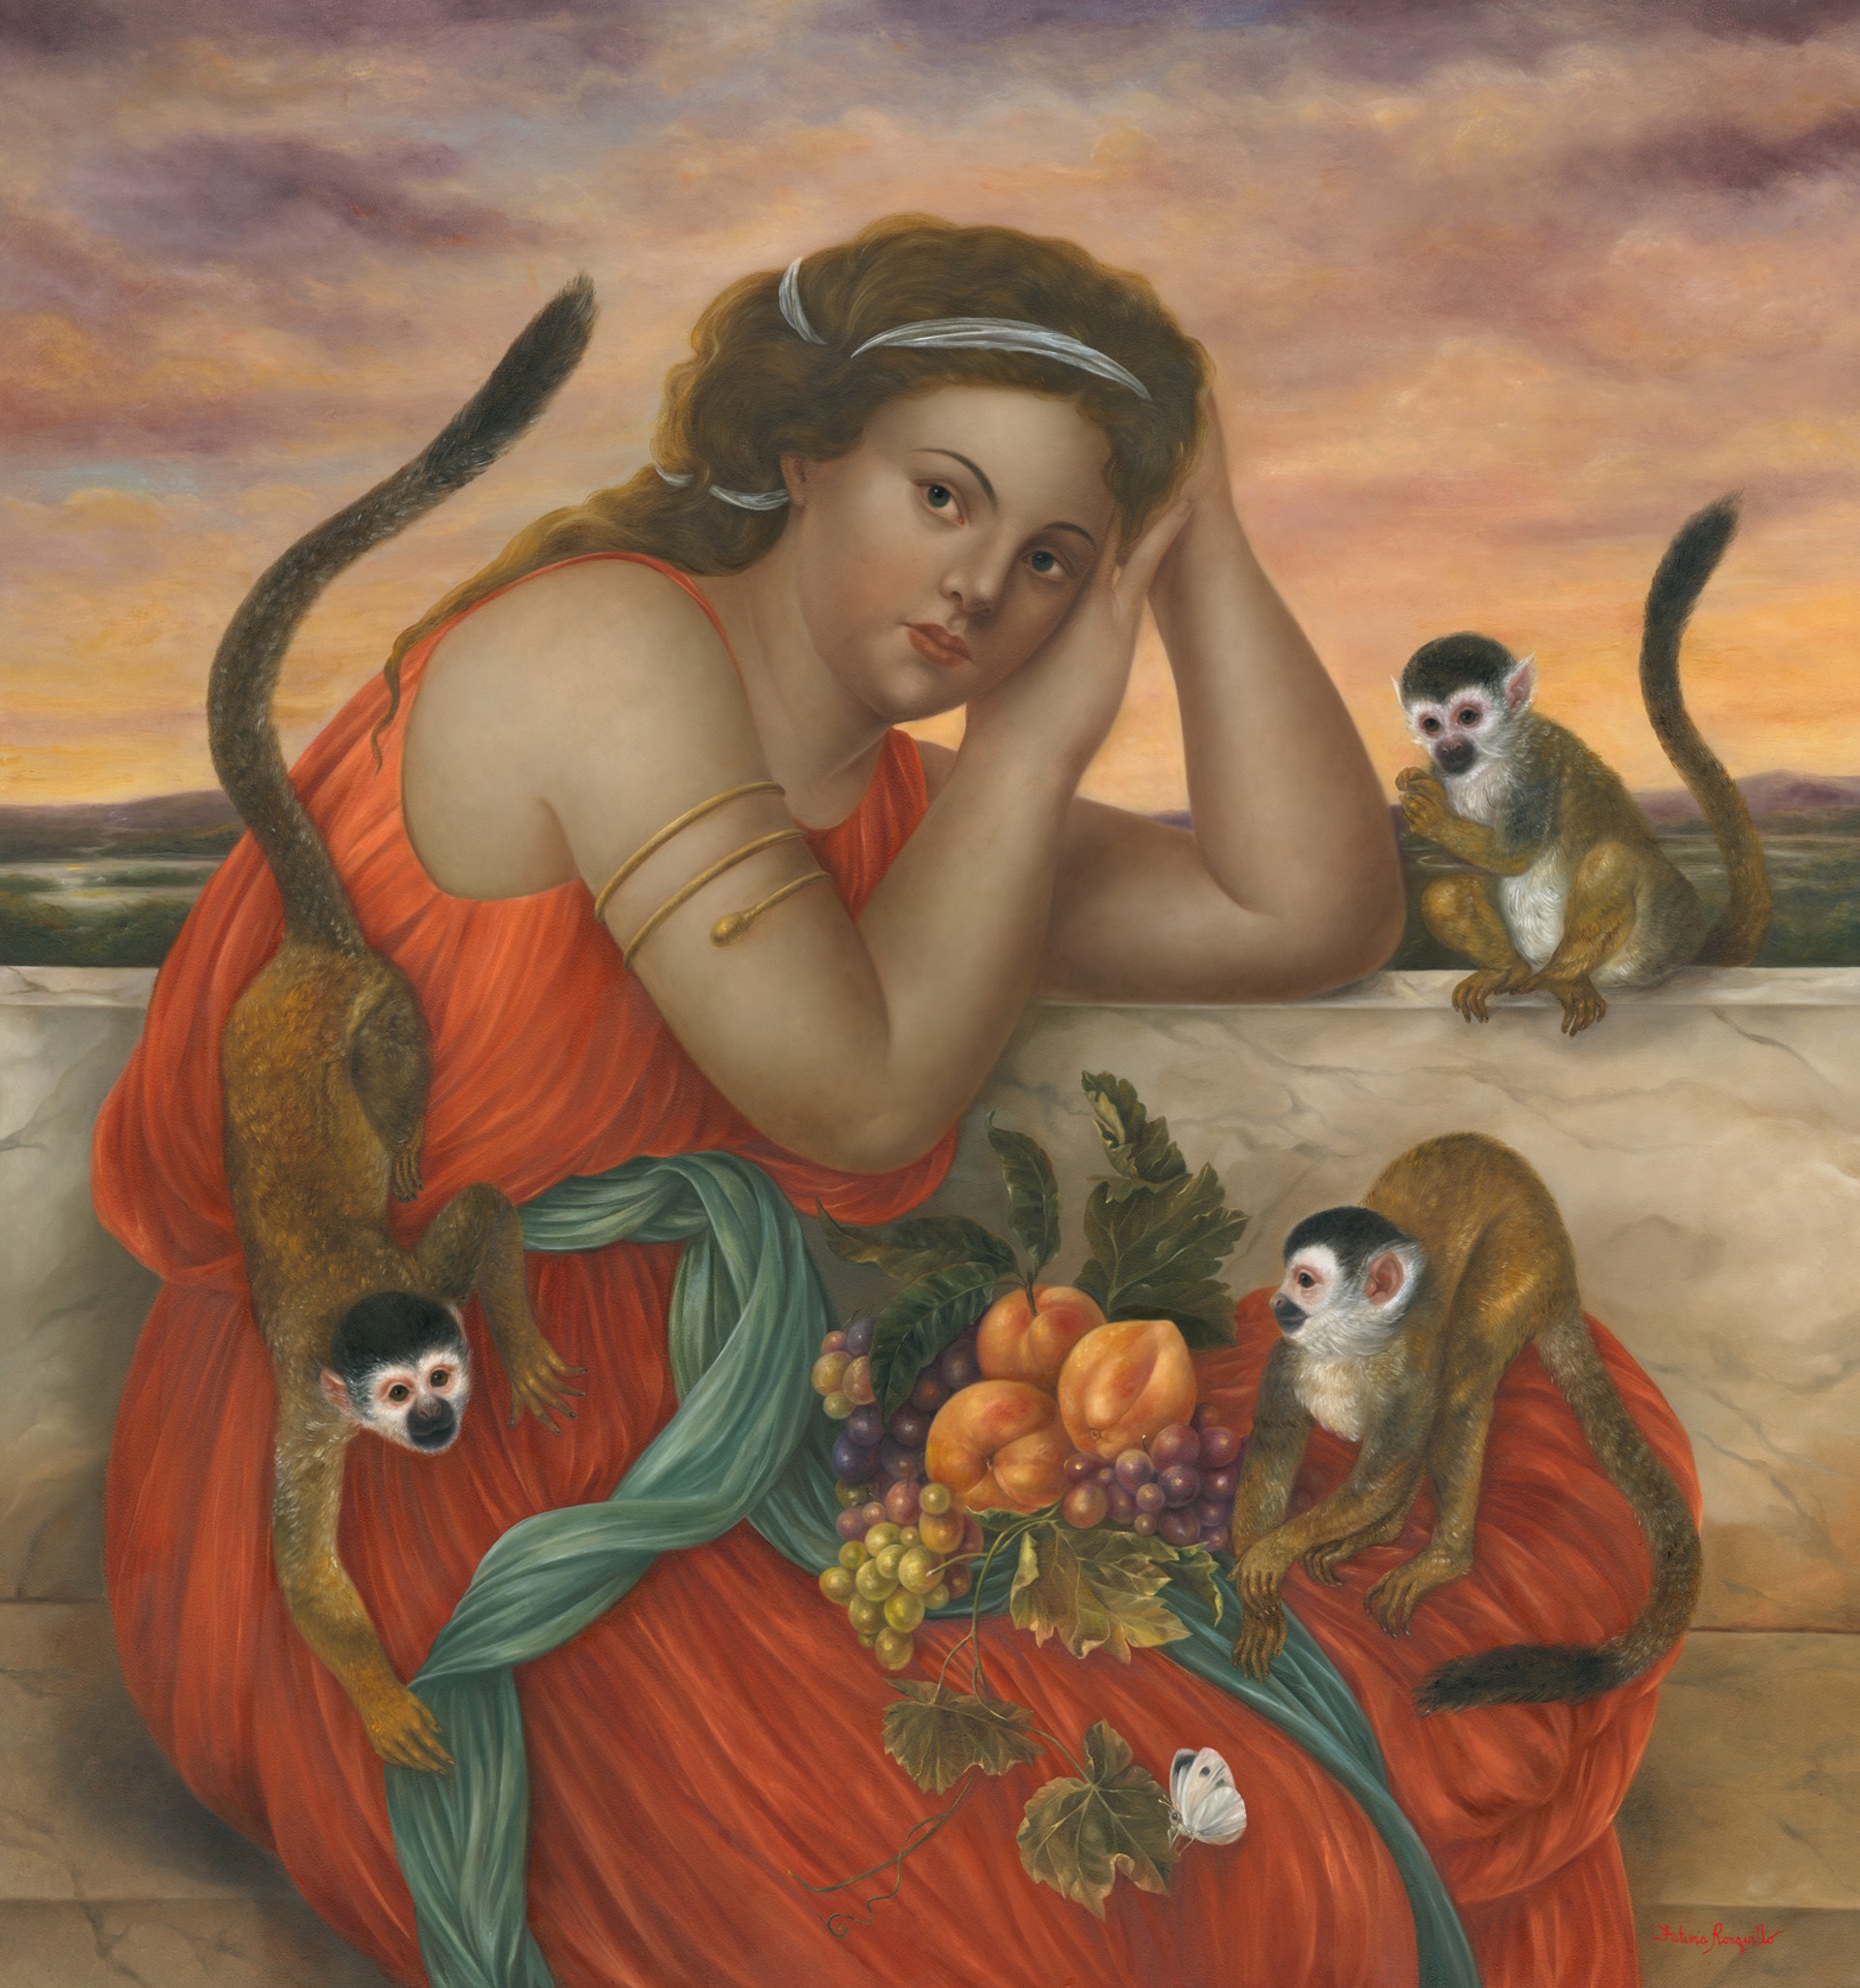 The Golden Hour by Fatima Ronquillo